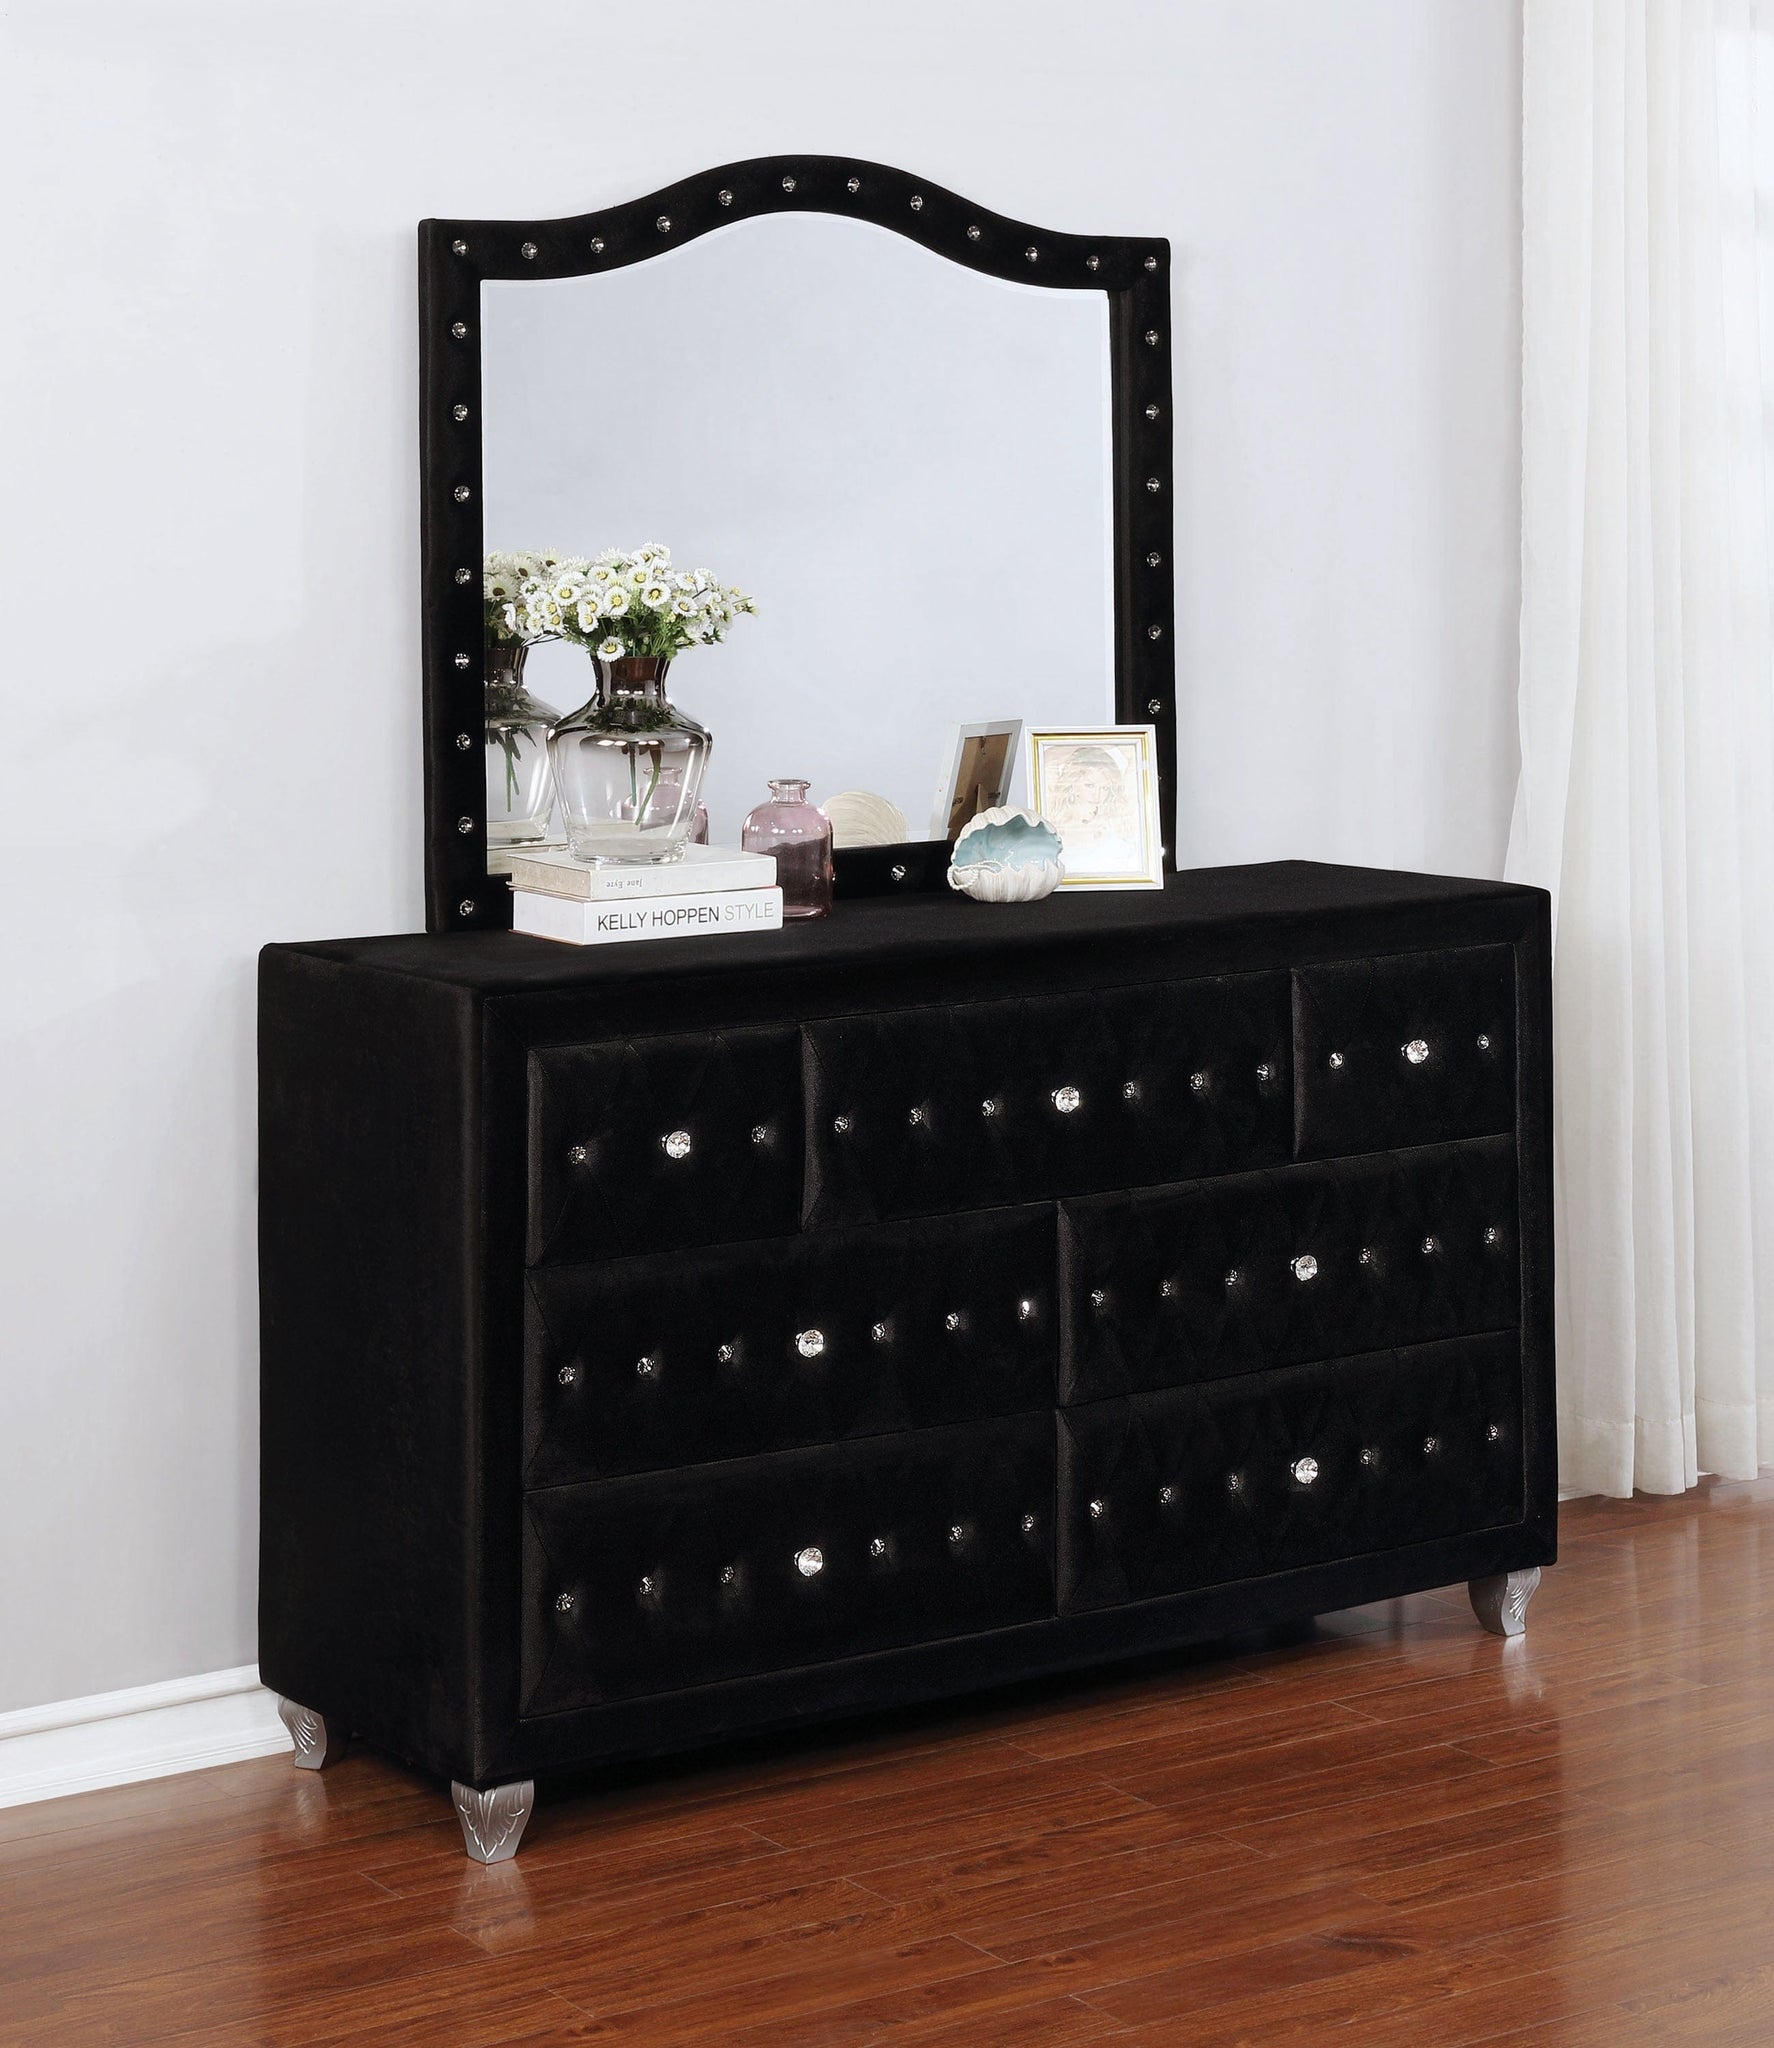 Deanna Button Tufted Mirror Black Collection: Transform A Sophisticated Space With This Stunning Large Black Mirror, Apply Makeup Or Do Your Hair In The Richly Elevated Reflection: Deanna SKU: 206104